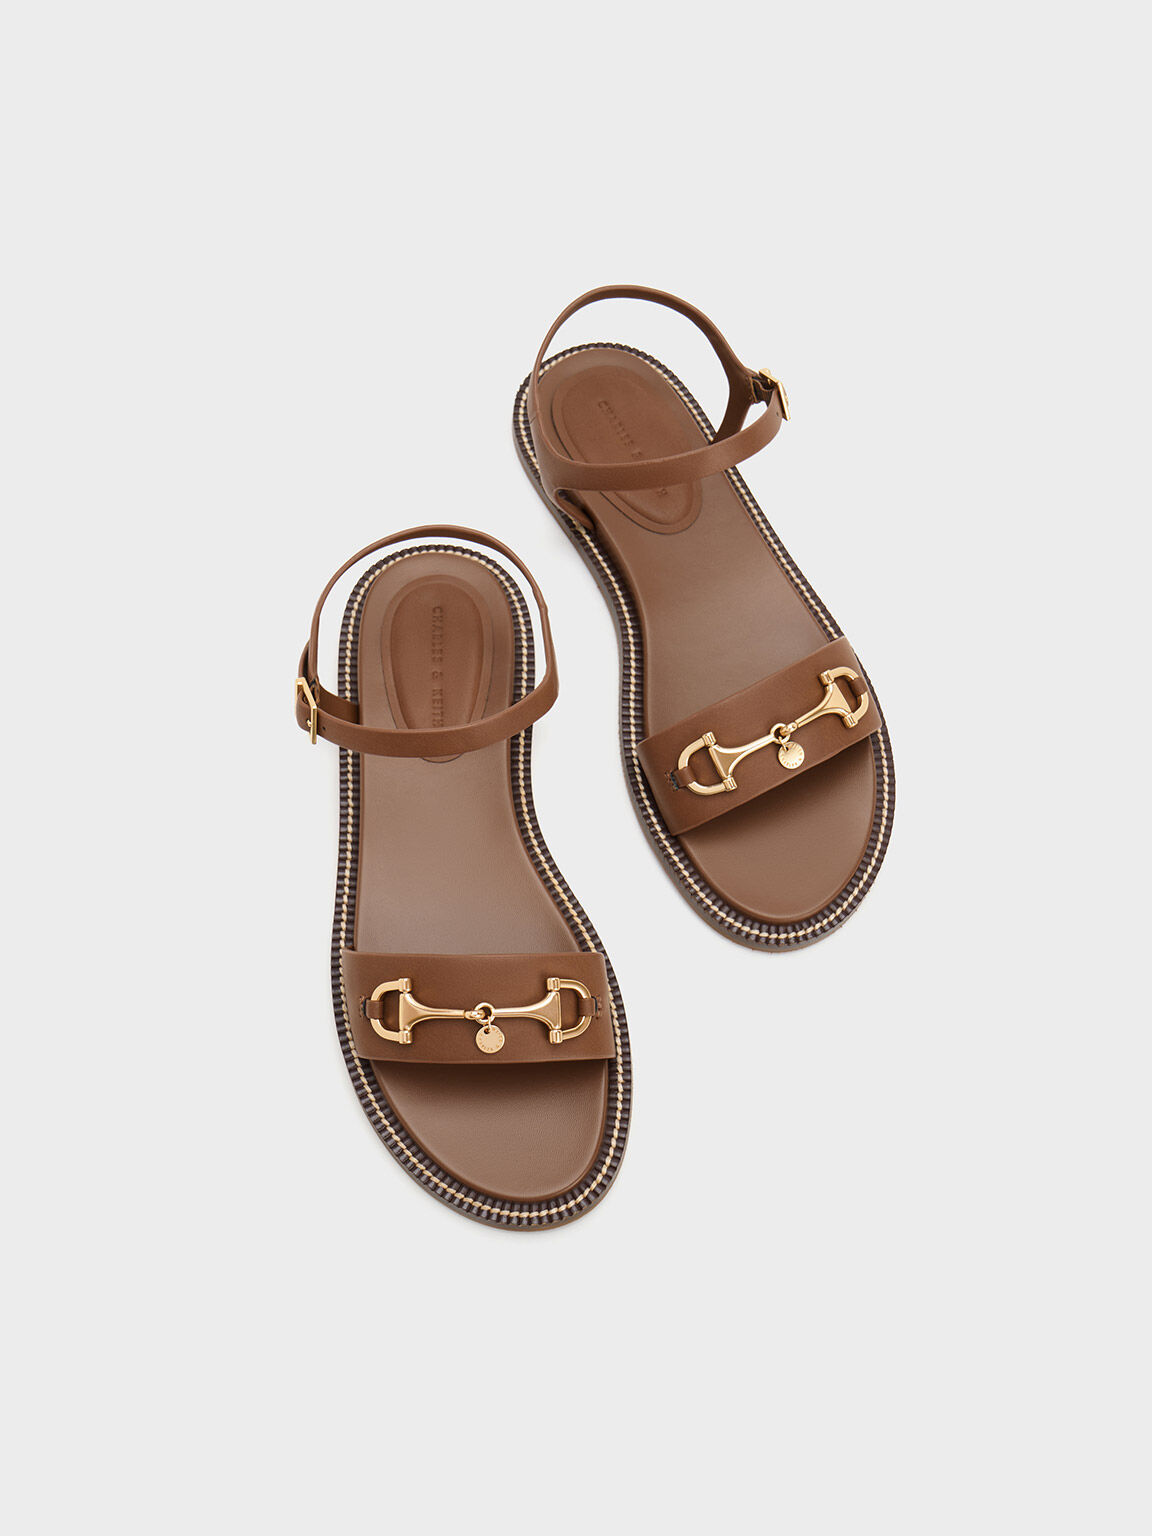 WMNS Sandal - Wide Leather Strap / Open Design / Chunky Heel / Brown